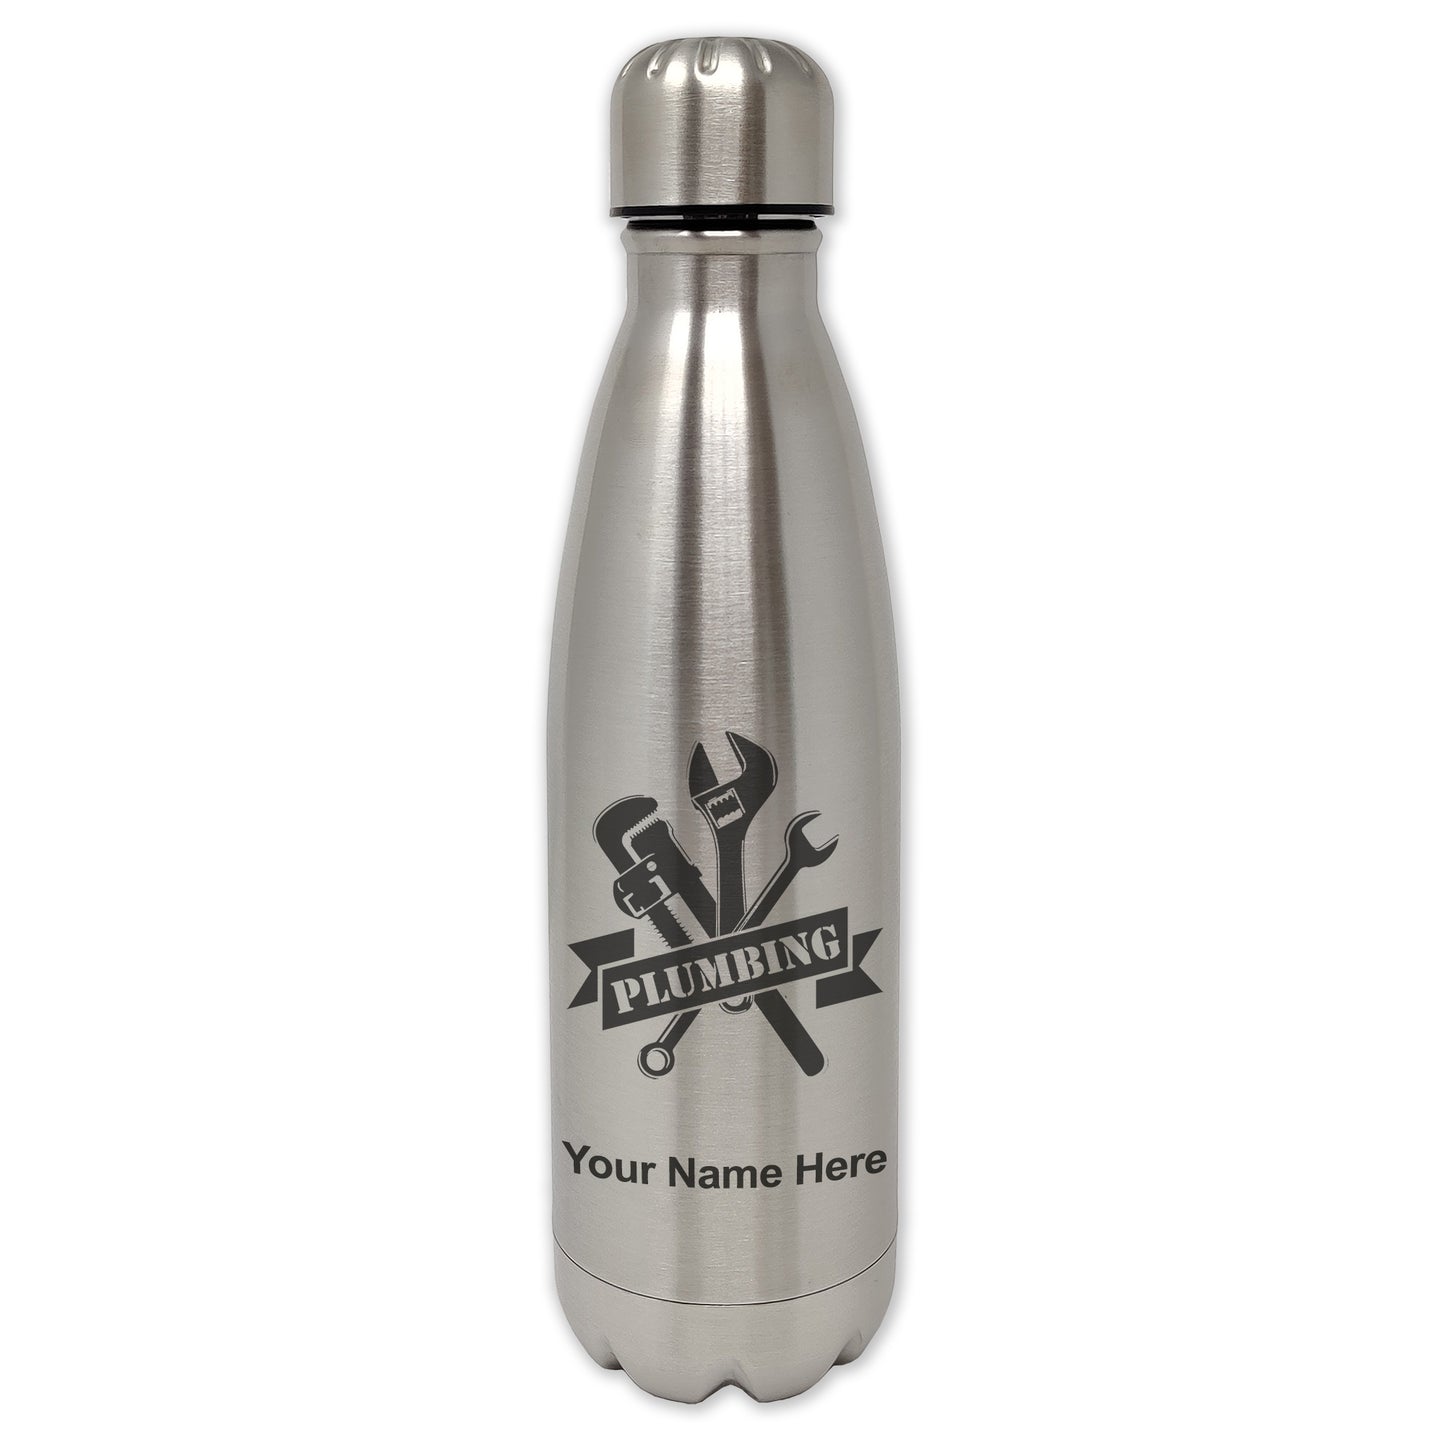 LaserGram Single Wall Water Bottle, Plumbing, Personalized Engraving Included